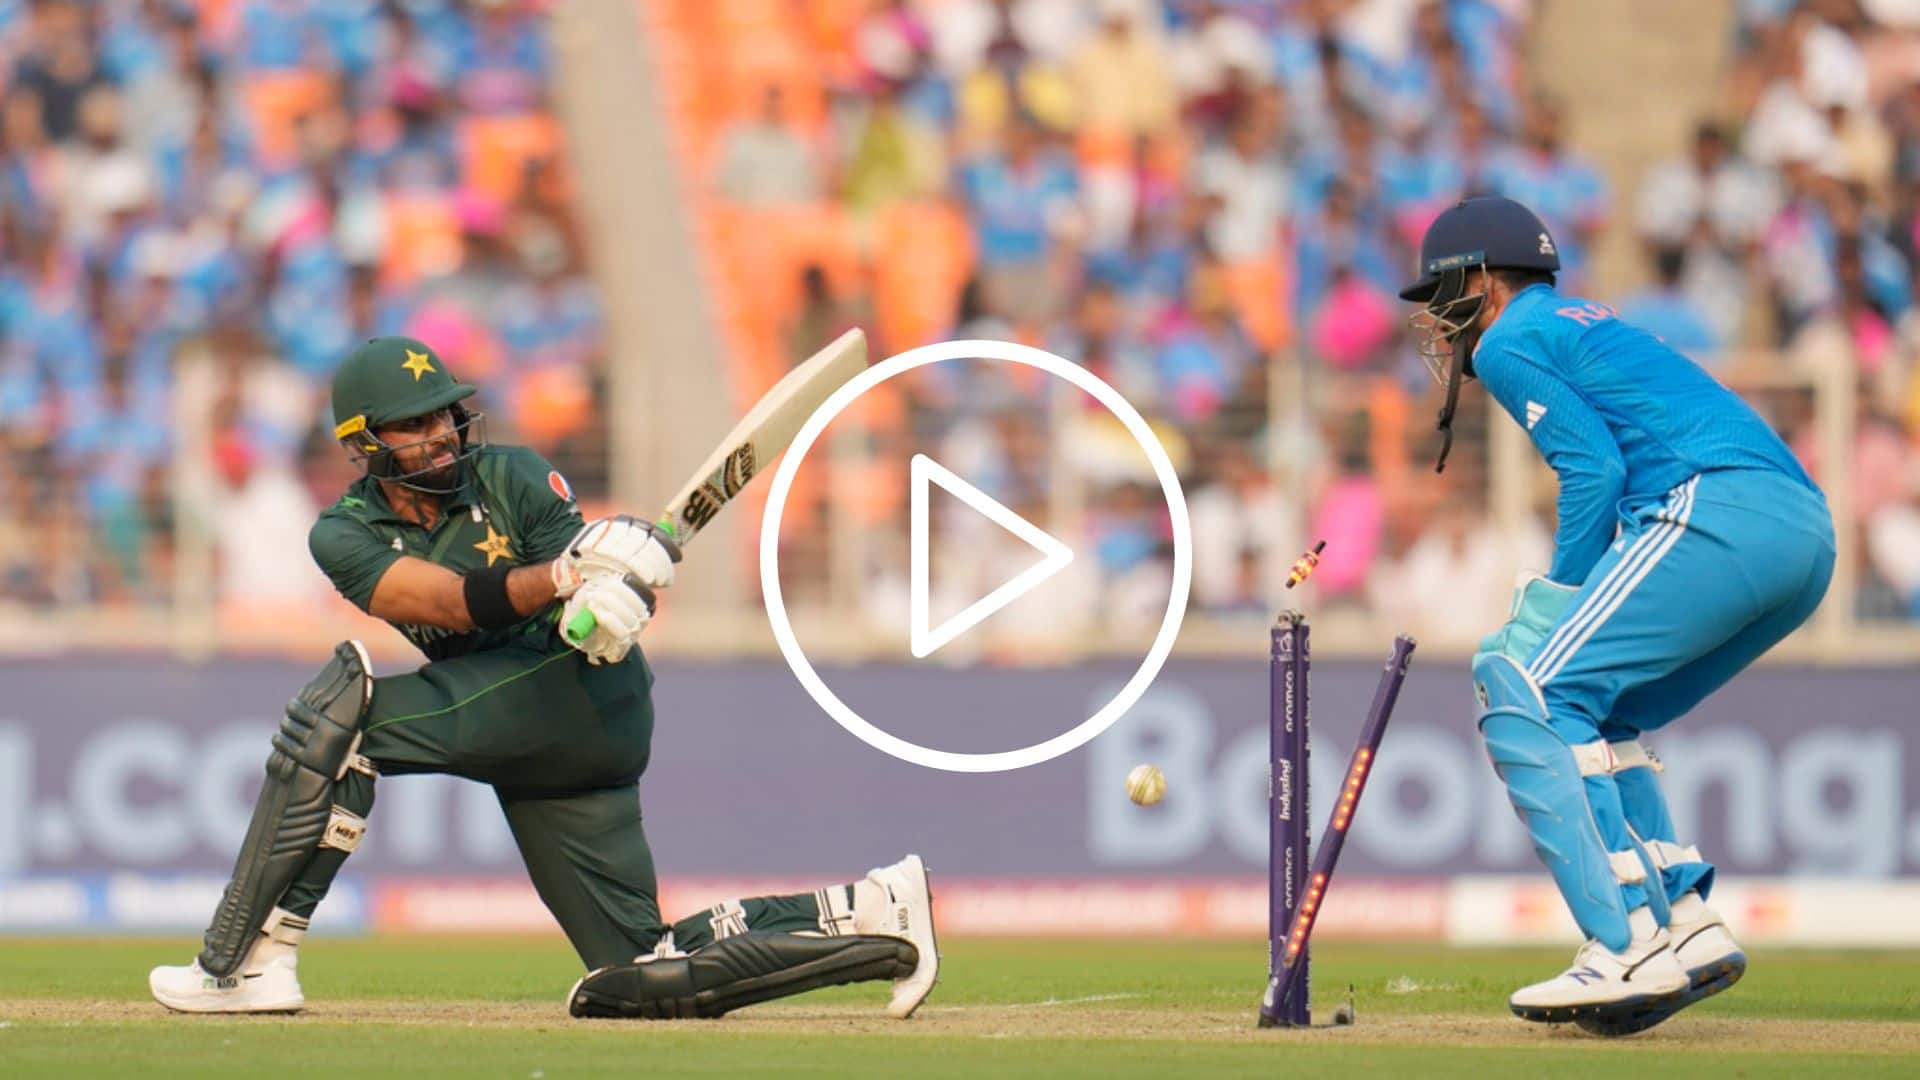 [Watch] Kuldeep Yadav Cleans Up Iftikhar Ahmed With A Magical Delivery